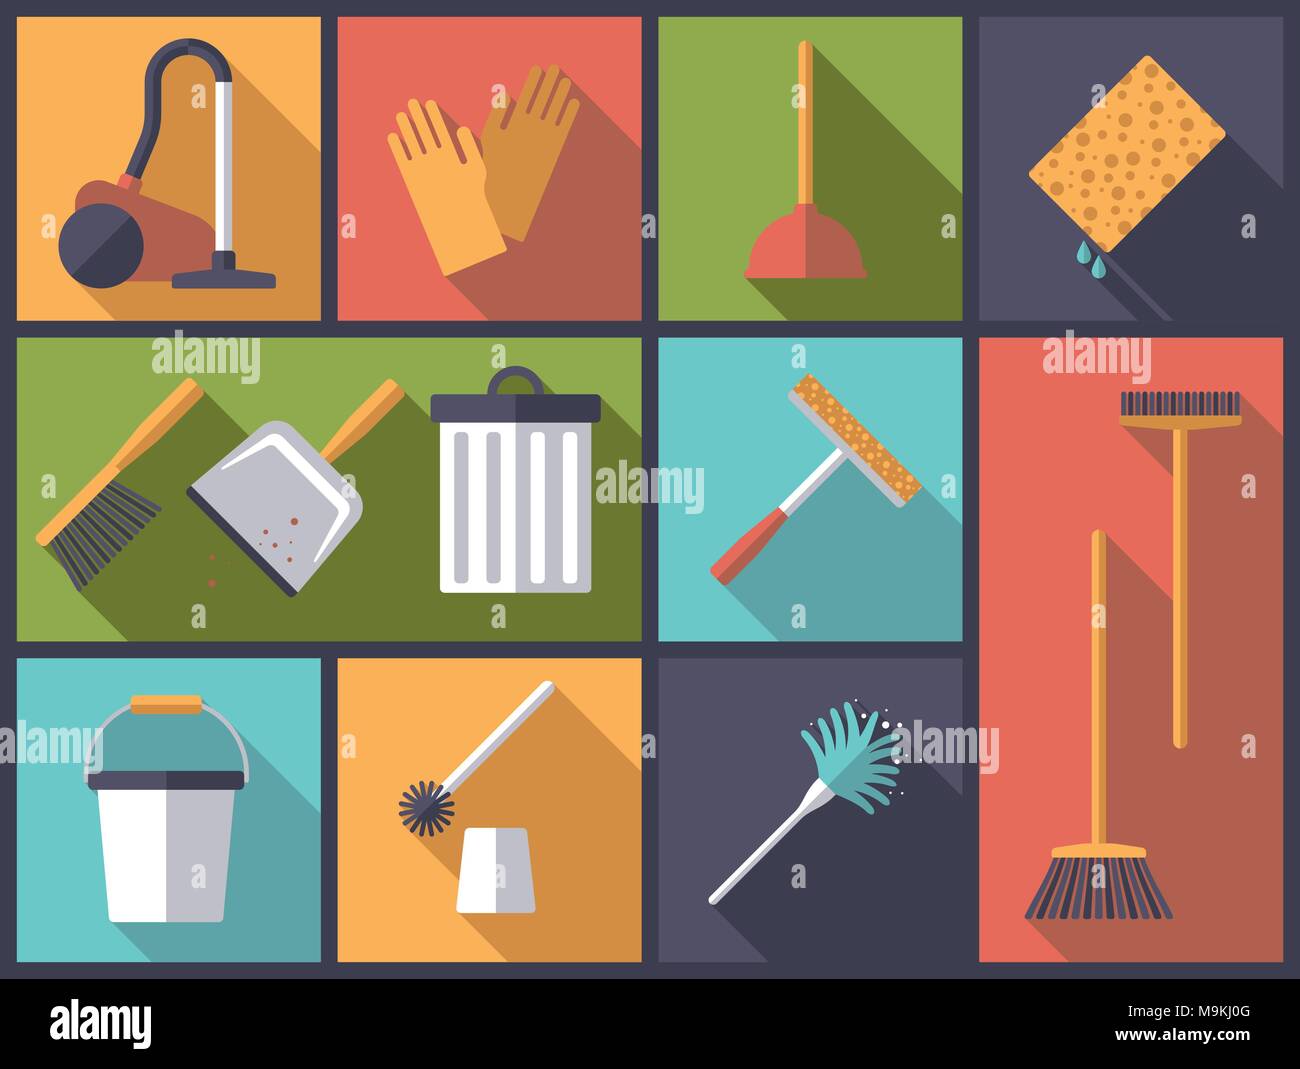 Horizontal flat design long shadow illustration with housework and cleaning symbols Stock Vector